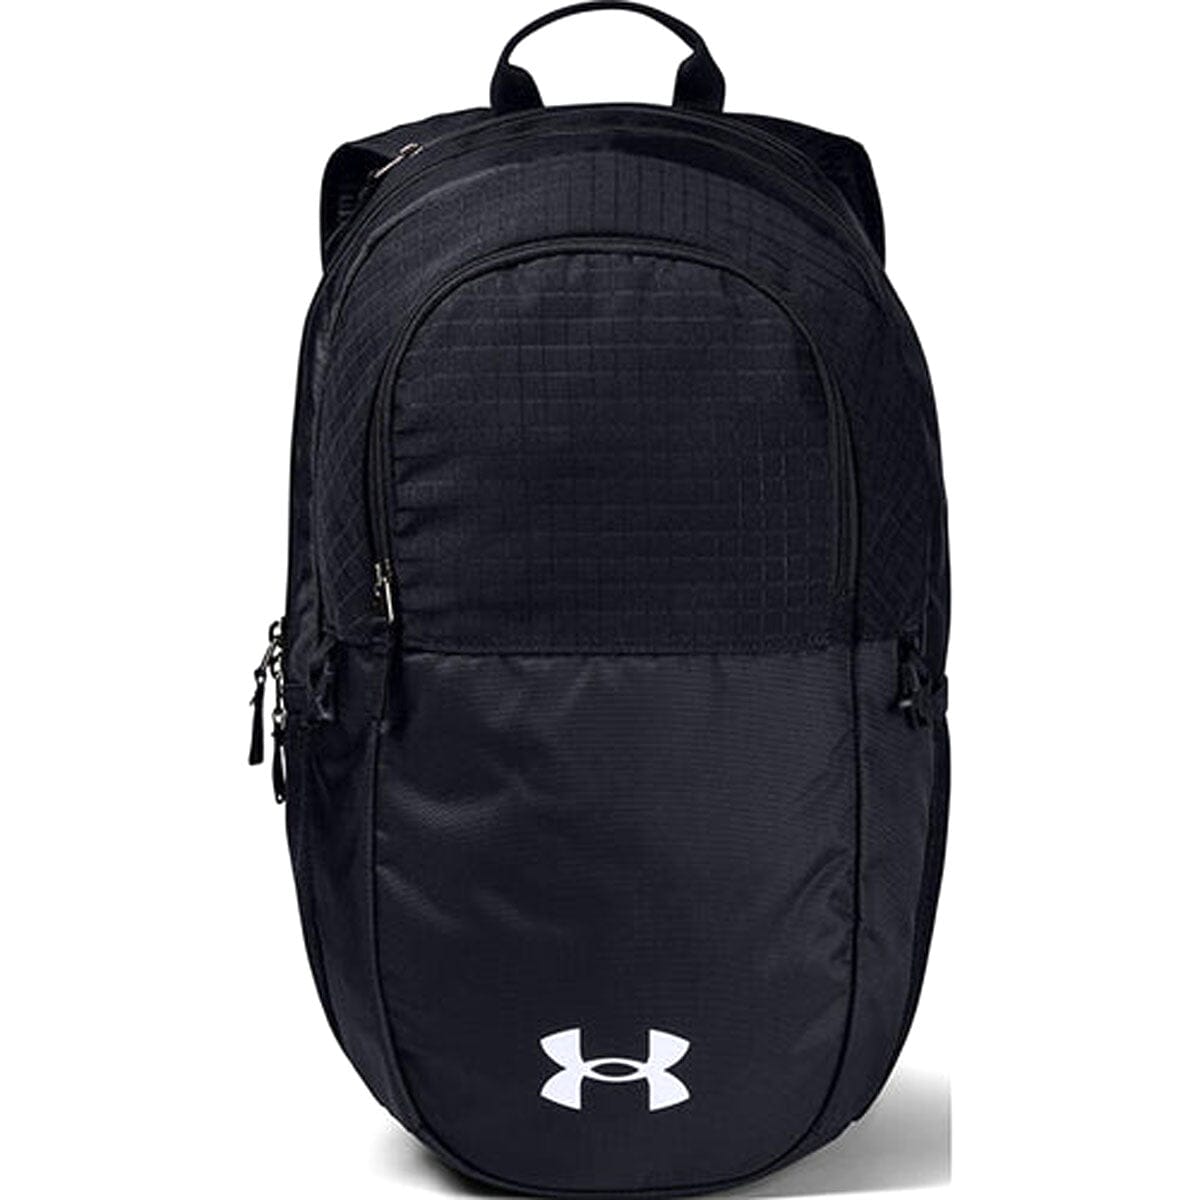 Under Armour UA All Sport Backpack Backpack Under Armour OSFA Black / Black / White 